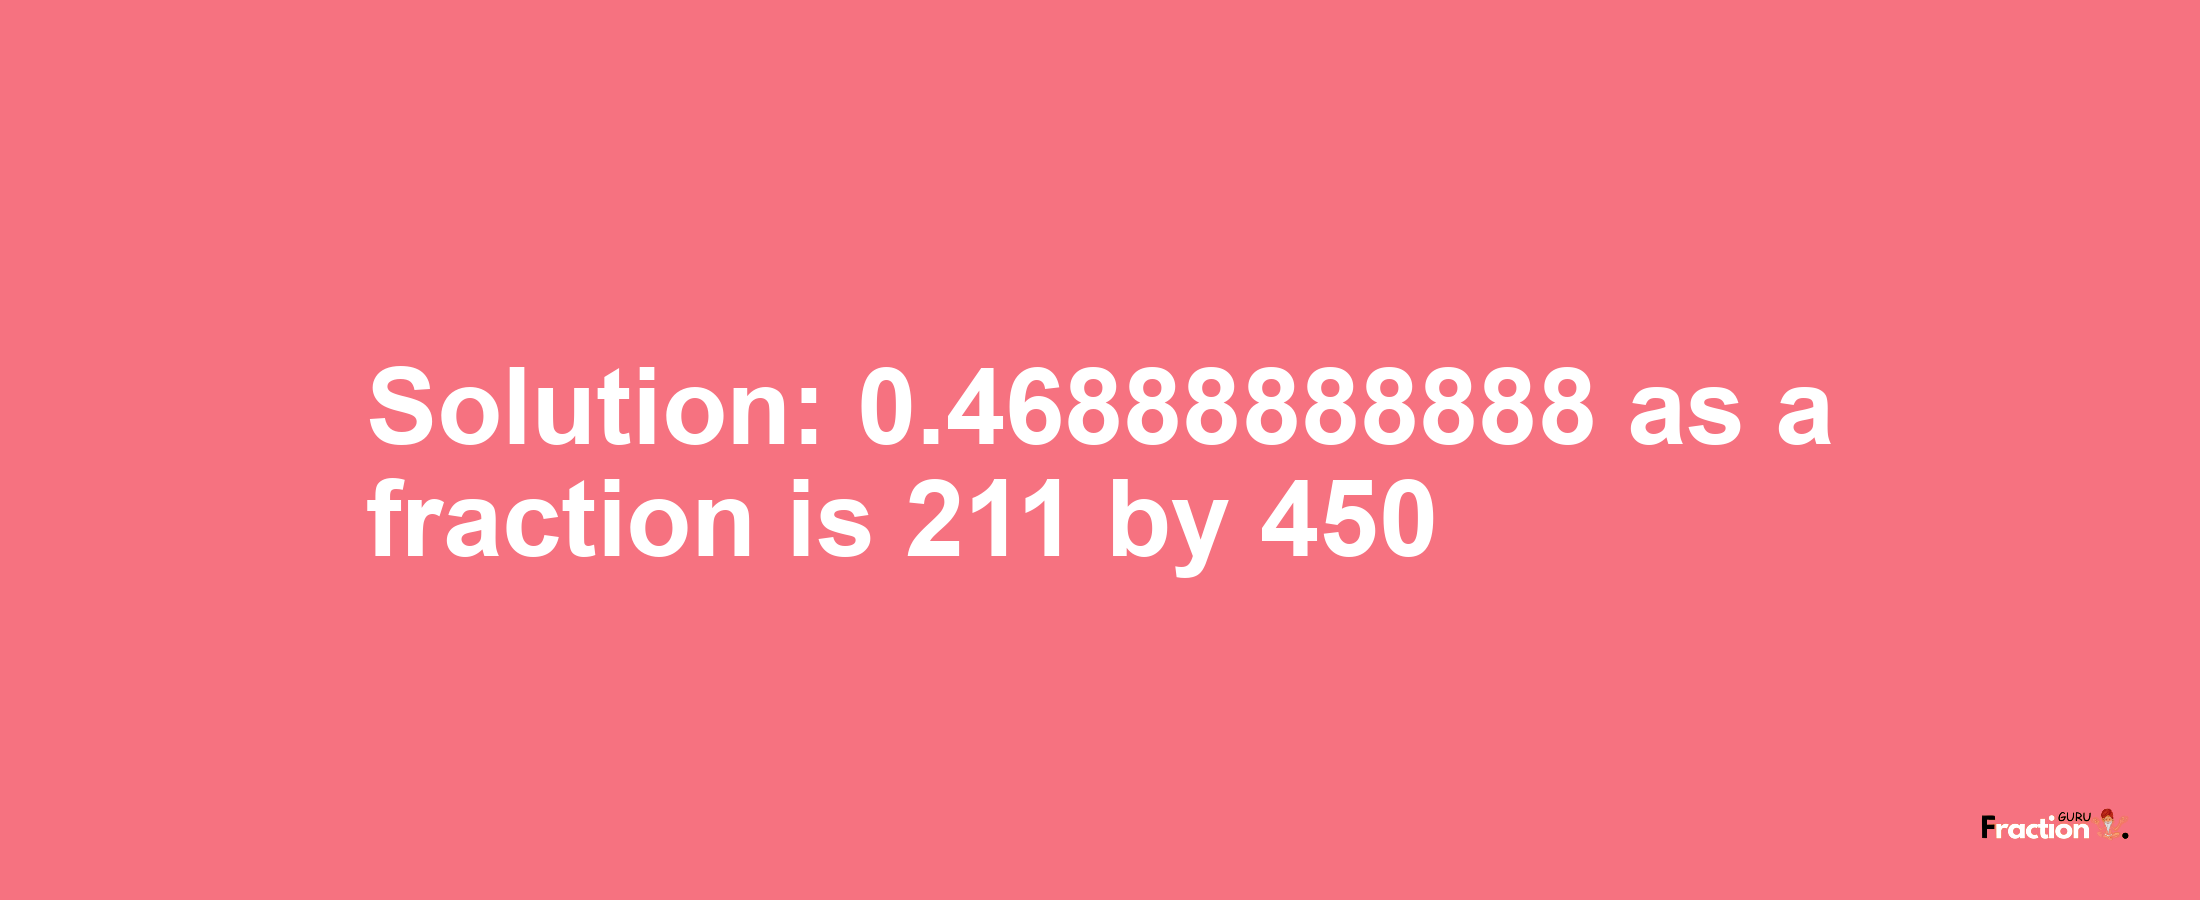 Solution:0.46888888888 as a fraction is 211/450